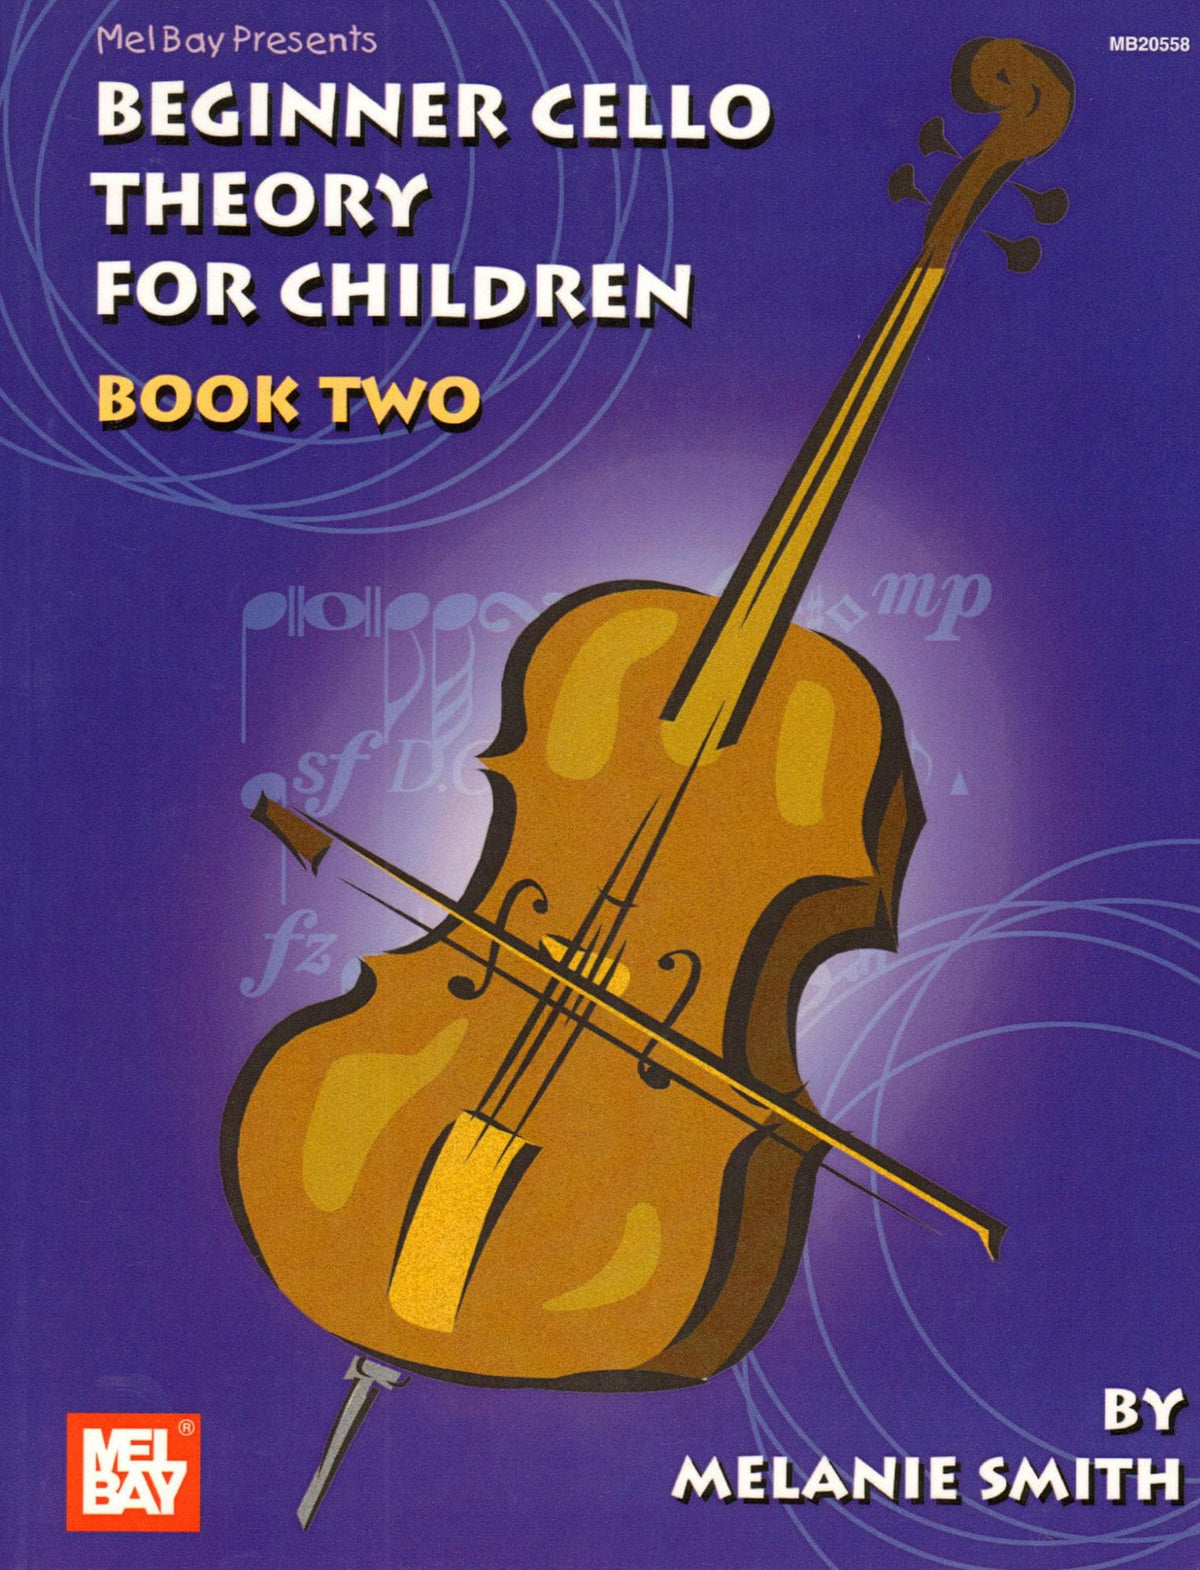 Beginner Cello Theory for Children - Book 2 by Melanie Smith - Mel Bay Publication